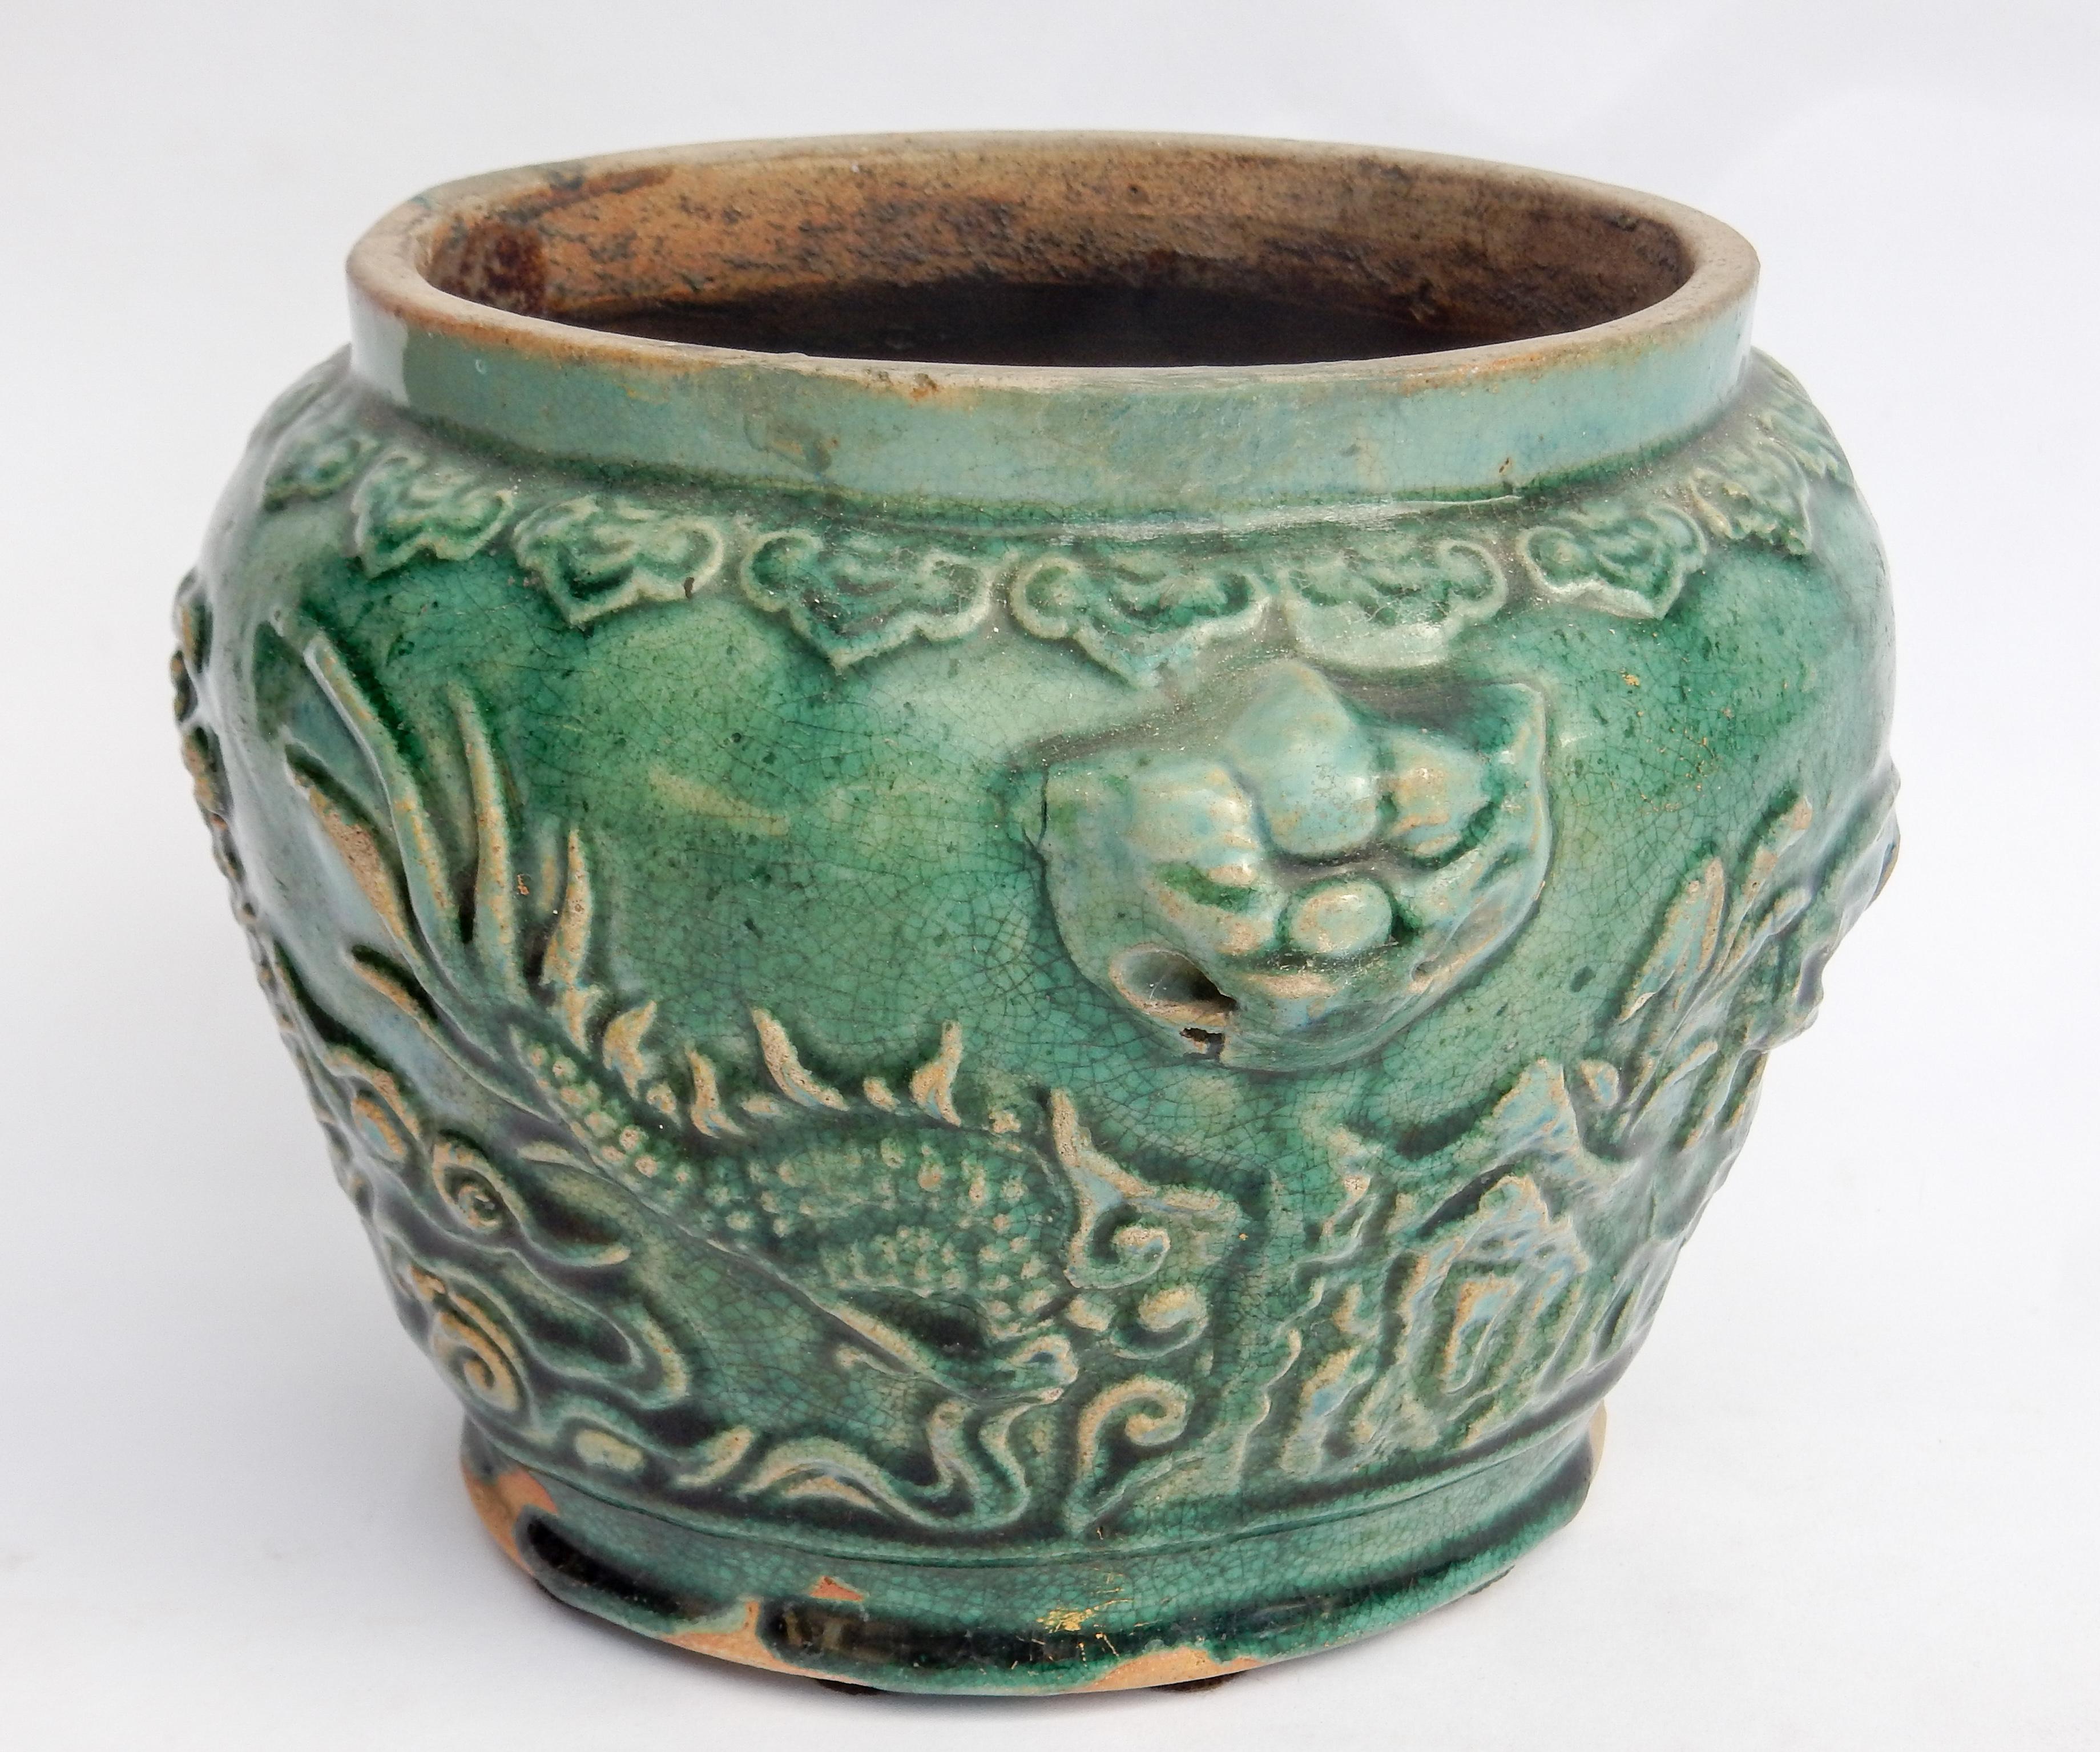 Hand-Crafted Old Green Glazed Pot from Southern Thailand, Found in Java, Late 19th Century